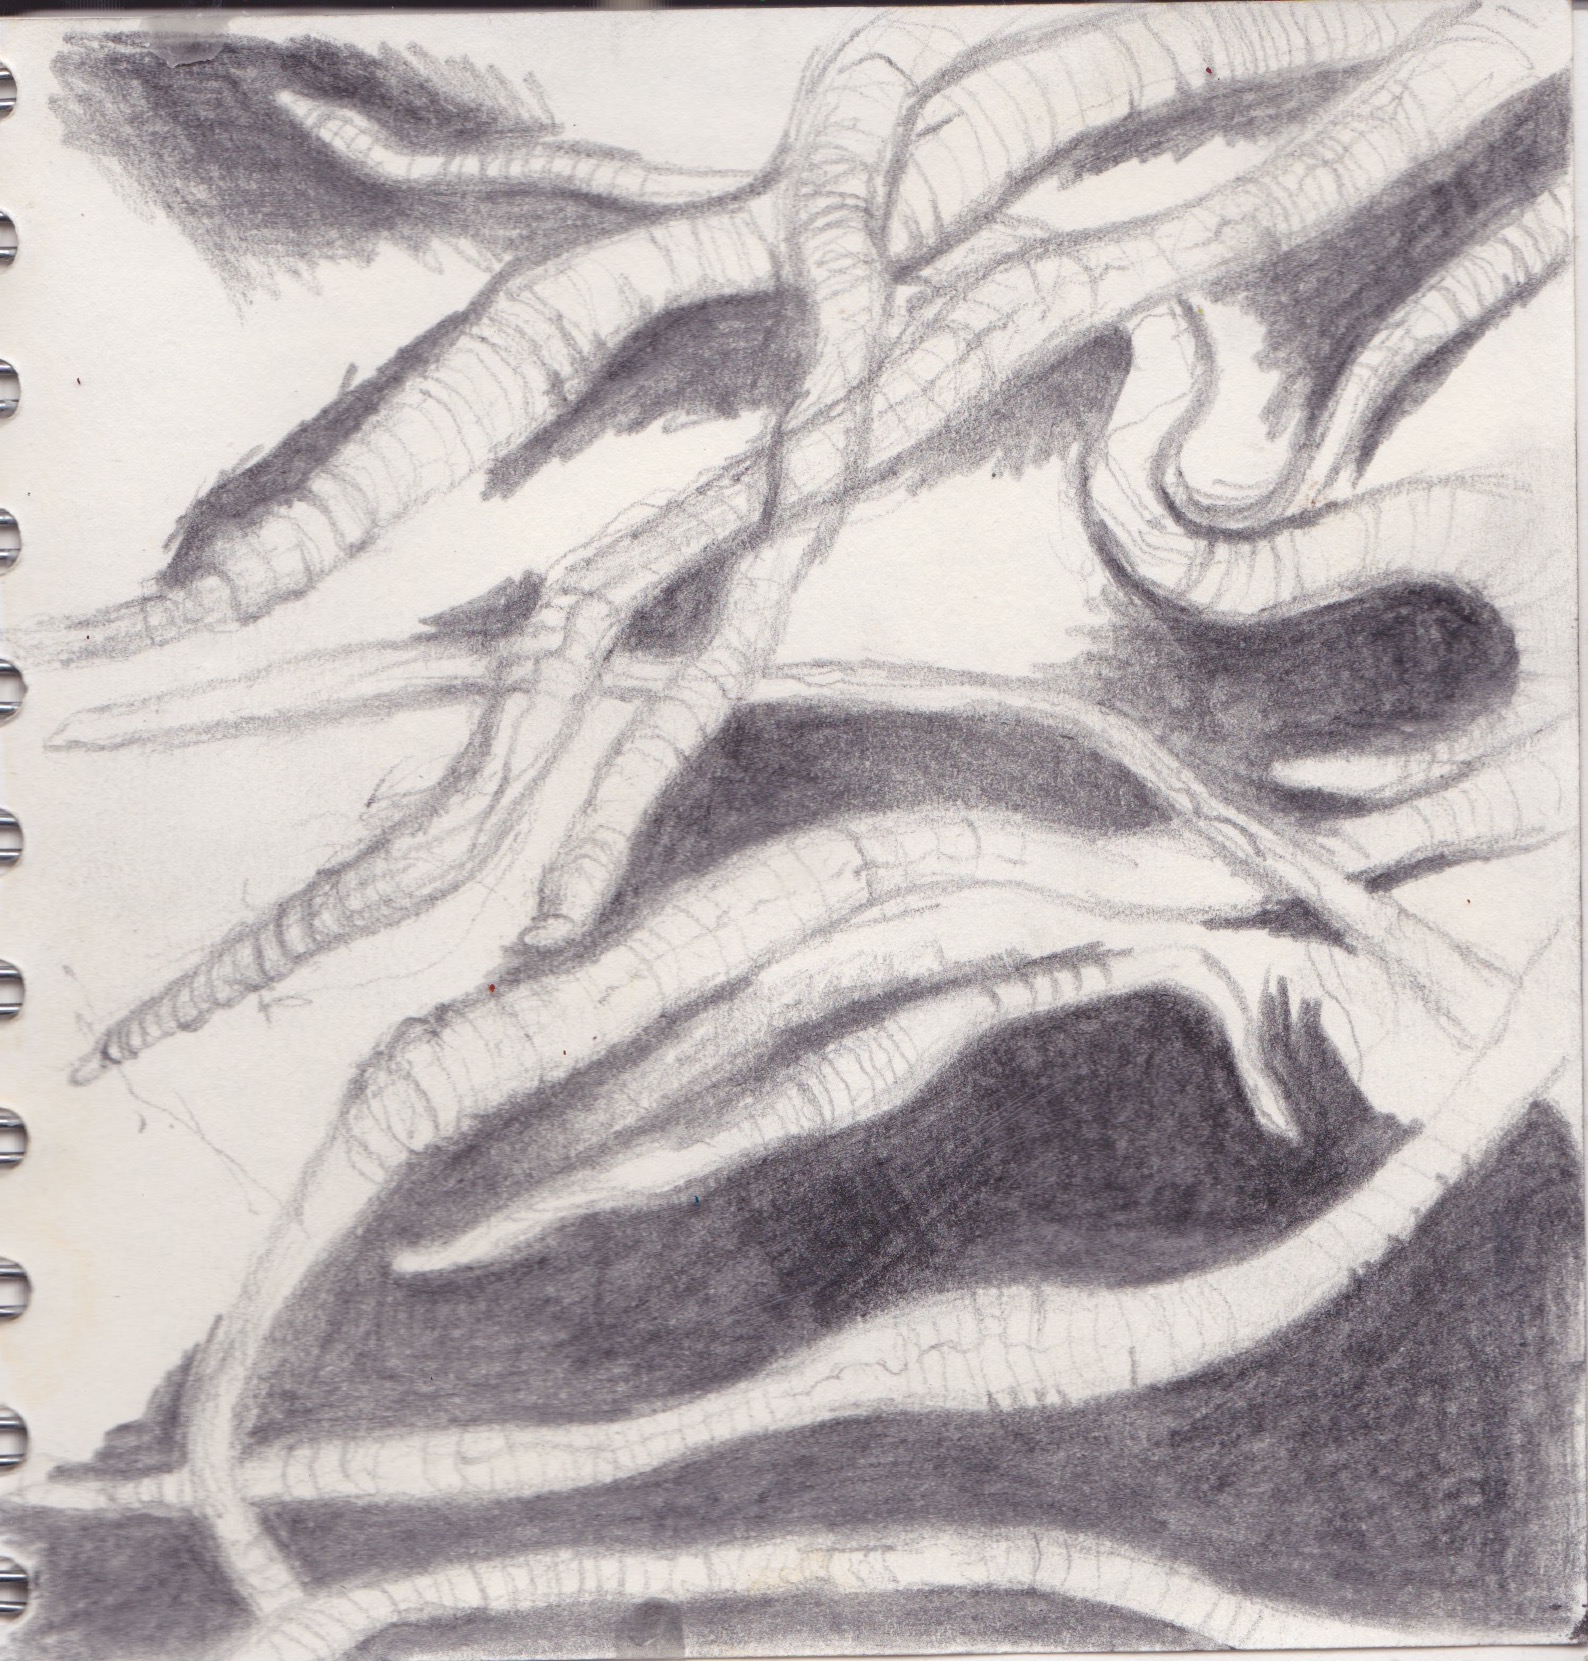 worm-drawing-graphite